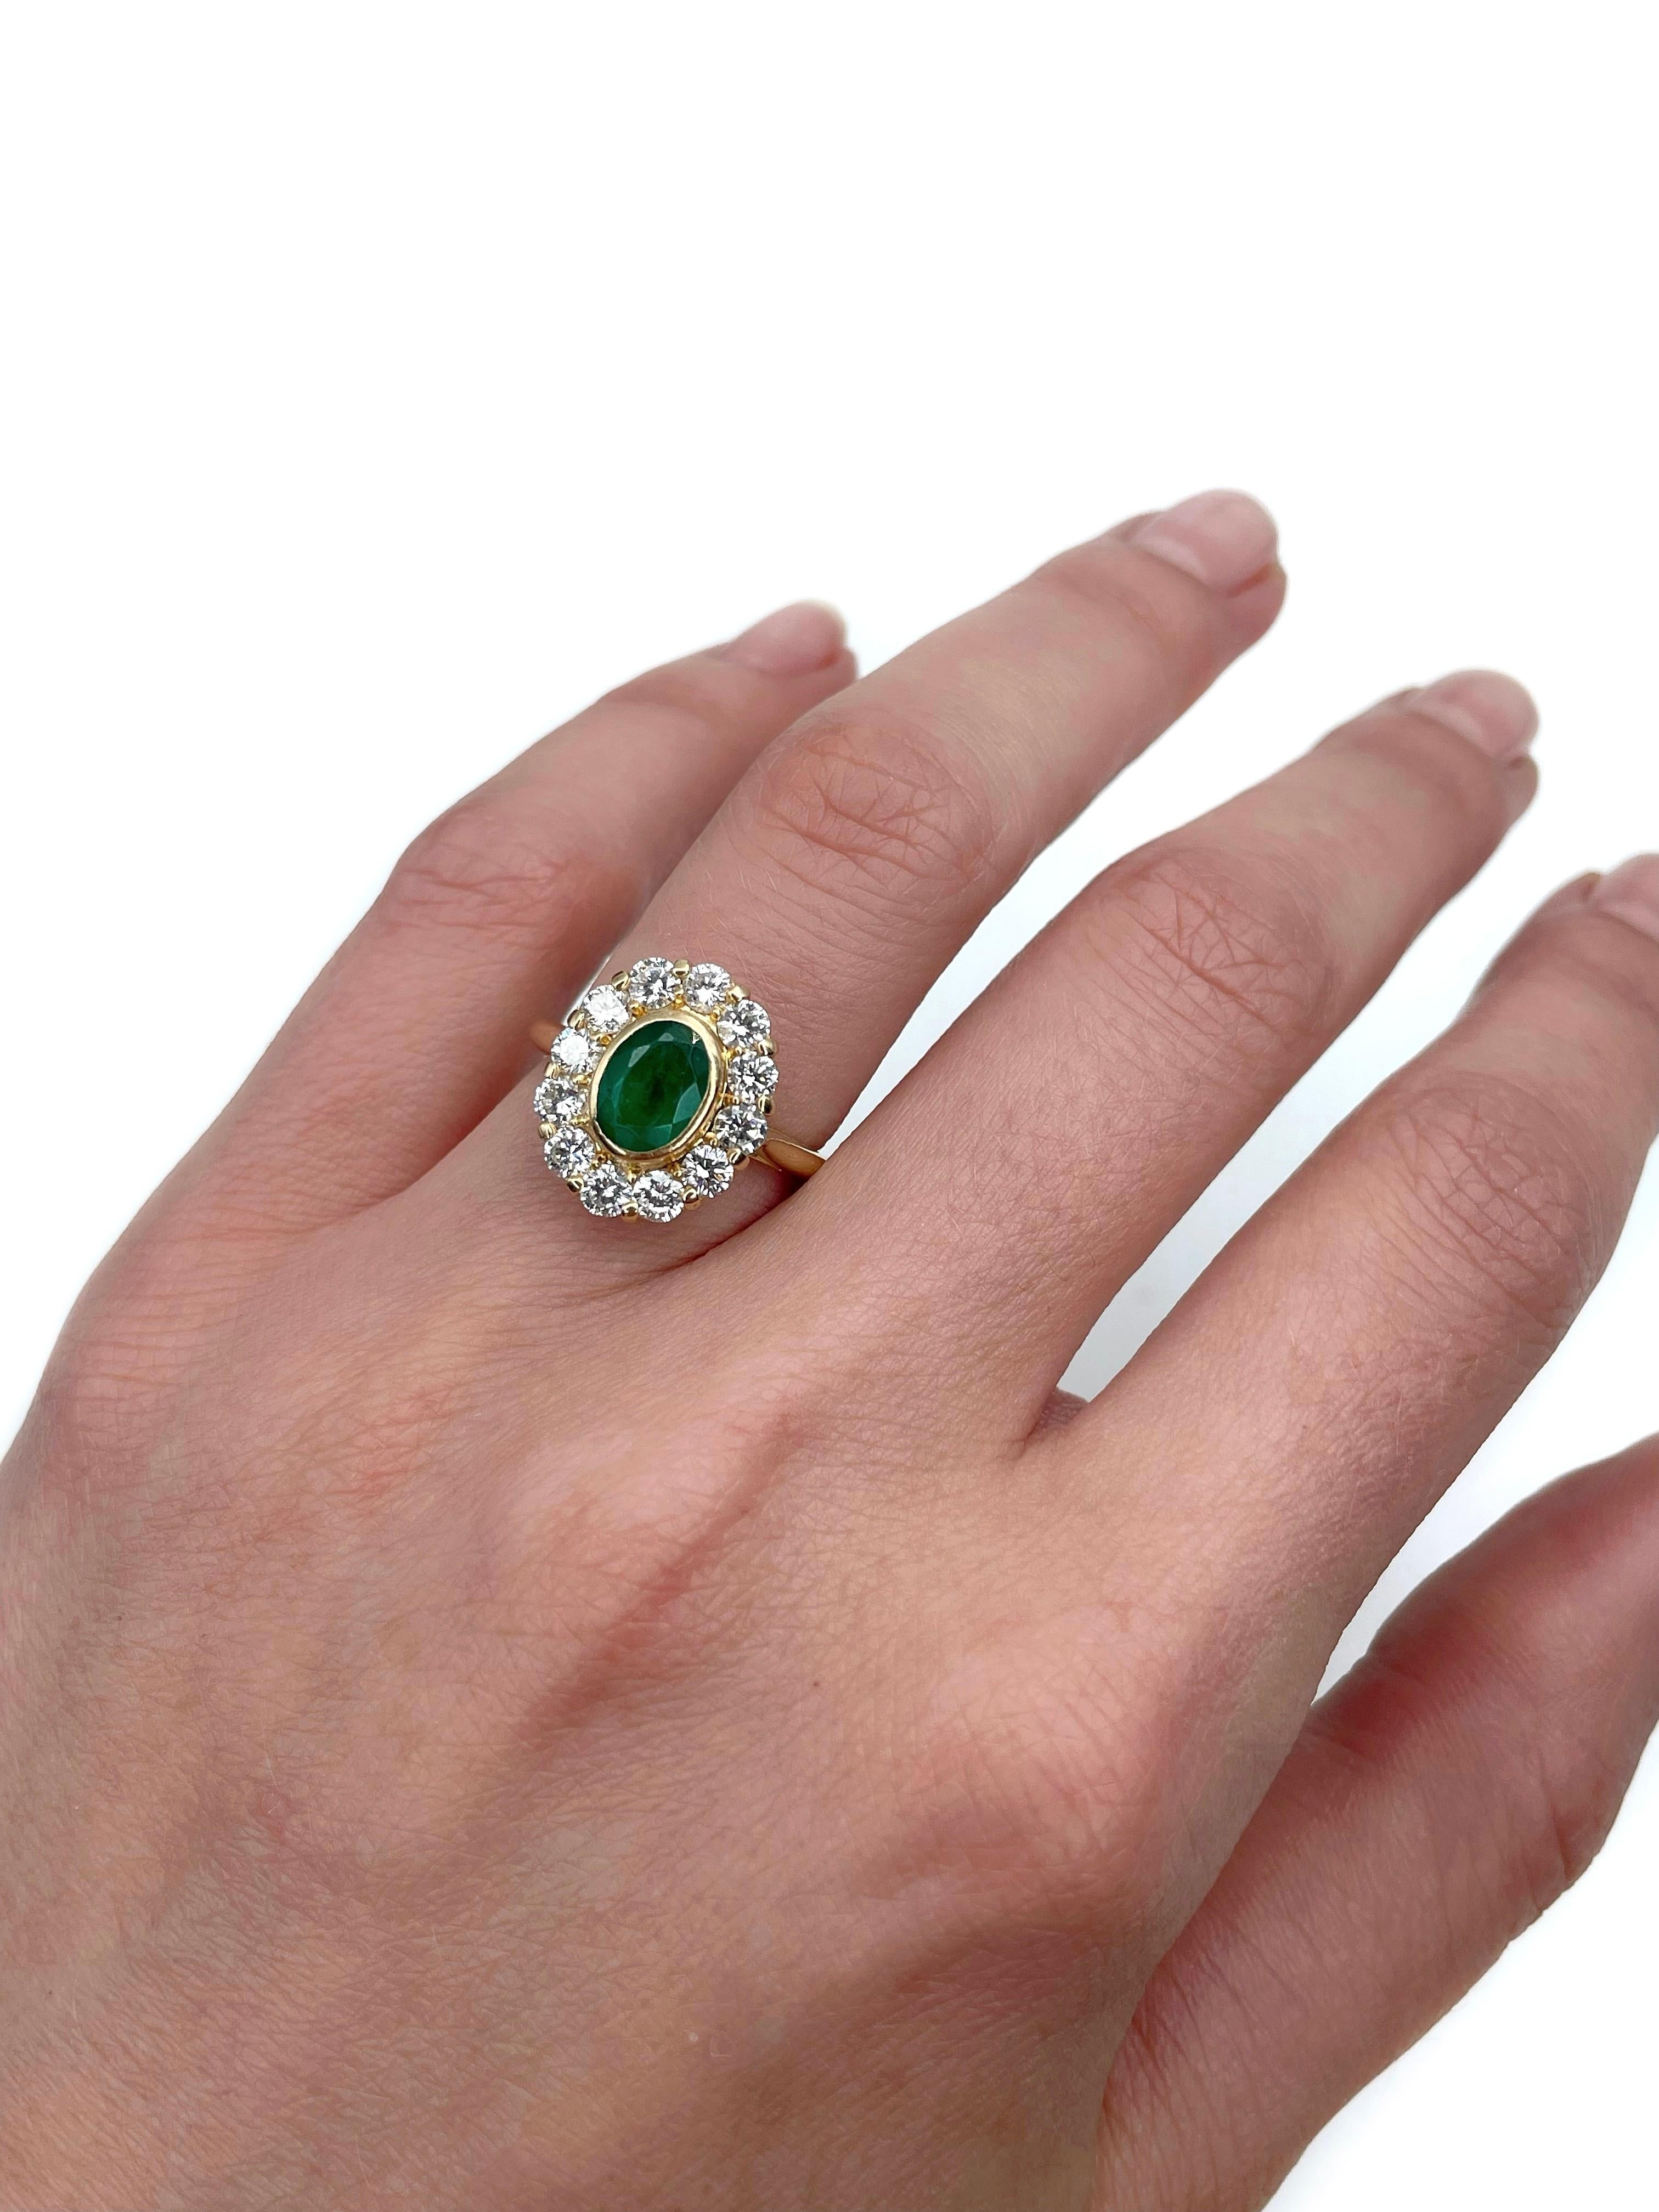 This is a vintage cluster ring crafted in 18K yellow gold. Circa 1970. 

The piece features:
- 1 emerald (oval cut, 0.80ct, vslbG 6/4, P2)
- 12 diamonds (round brilliant cut , TW 1.10ct, RW-W, VS)

Weight: 4.05g
Size: 16.25 (US 5.5)

IMPORTANT: